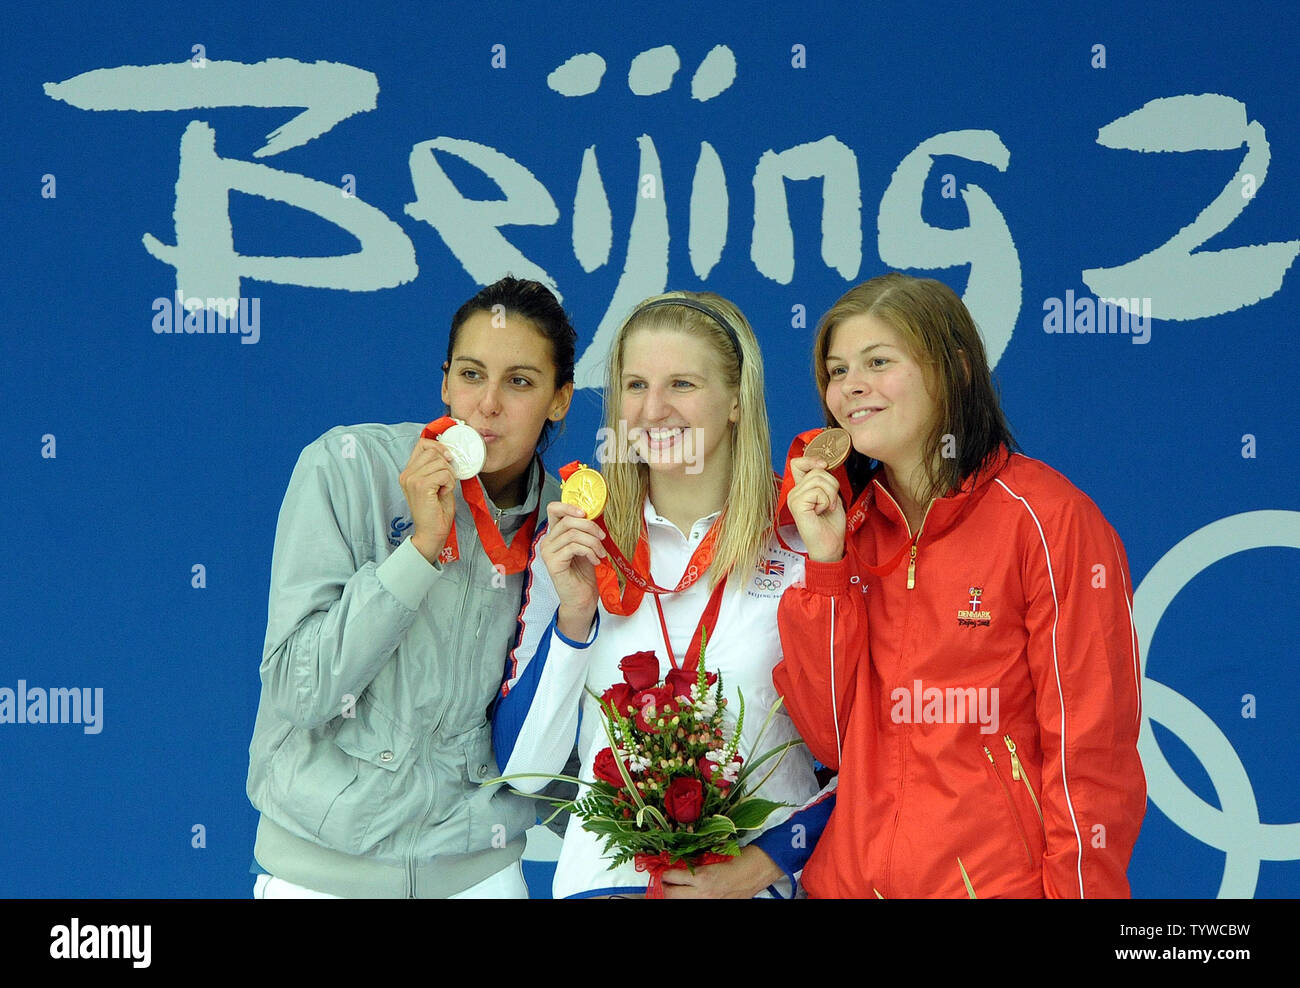 Alessia Filippi (silver), Britain's Rebecca Adlington (gold) and Denmarks Lotte Friis (bronze) show the medals they won in the Women's 800M Freestyle at the National Aquatic Center (Water Cube) during the 2008 Summer Olympics in Beijing, China, on August 16, 2008.     (UPI Photo/Roger L. Wollenberg) Stock Photo